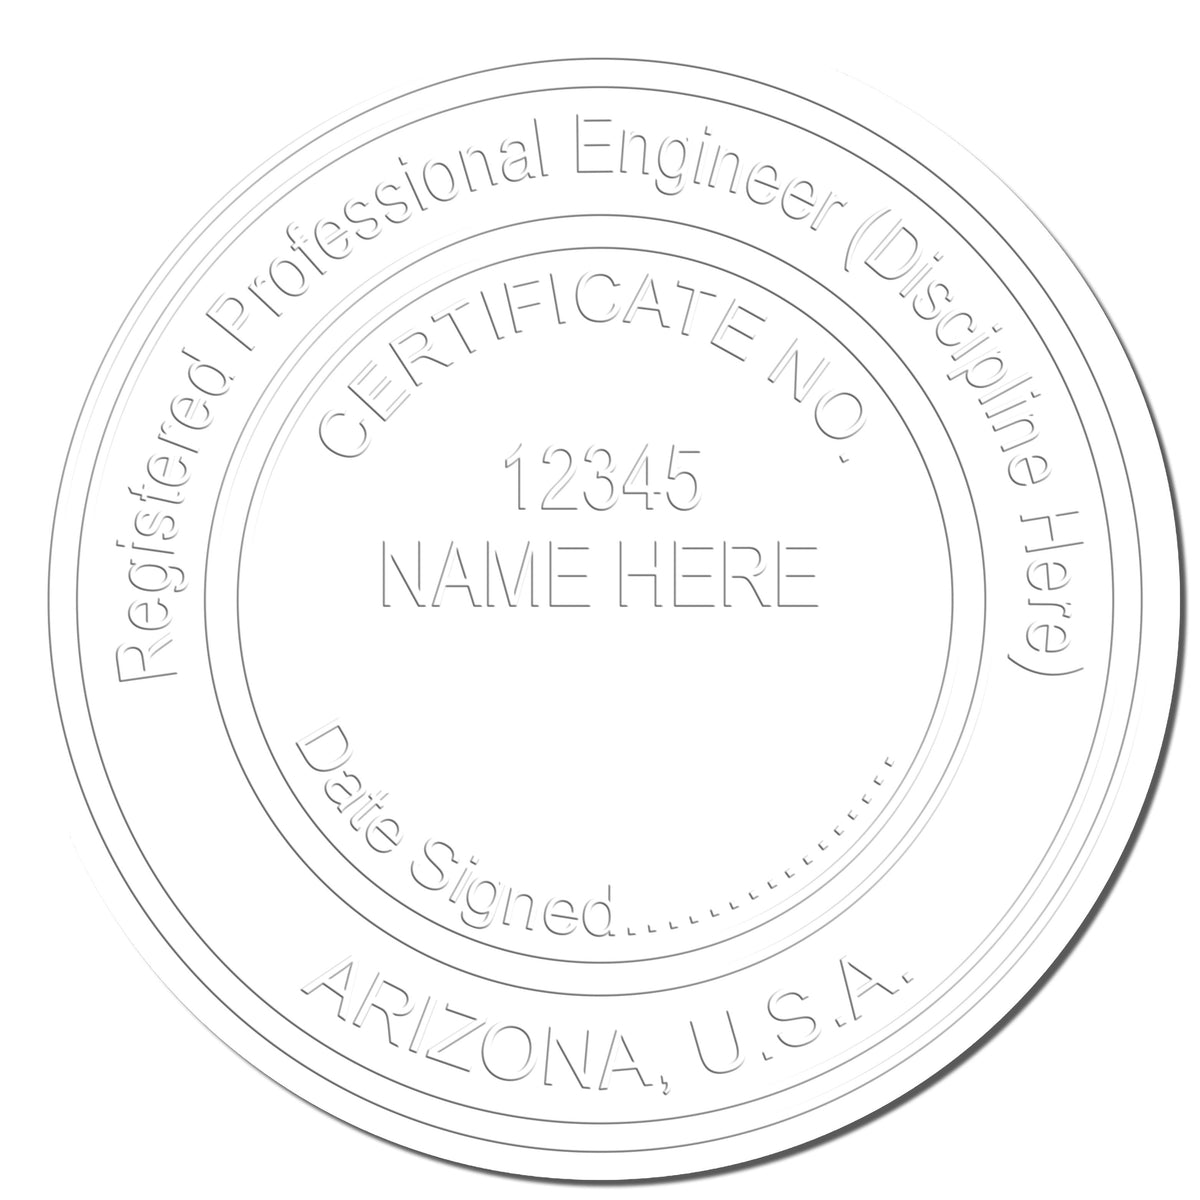 This paper is stamped with a sample imprint of the Hybrid Arizona Engineer Seal, signifying its quality and reliability.